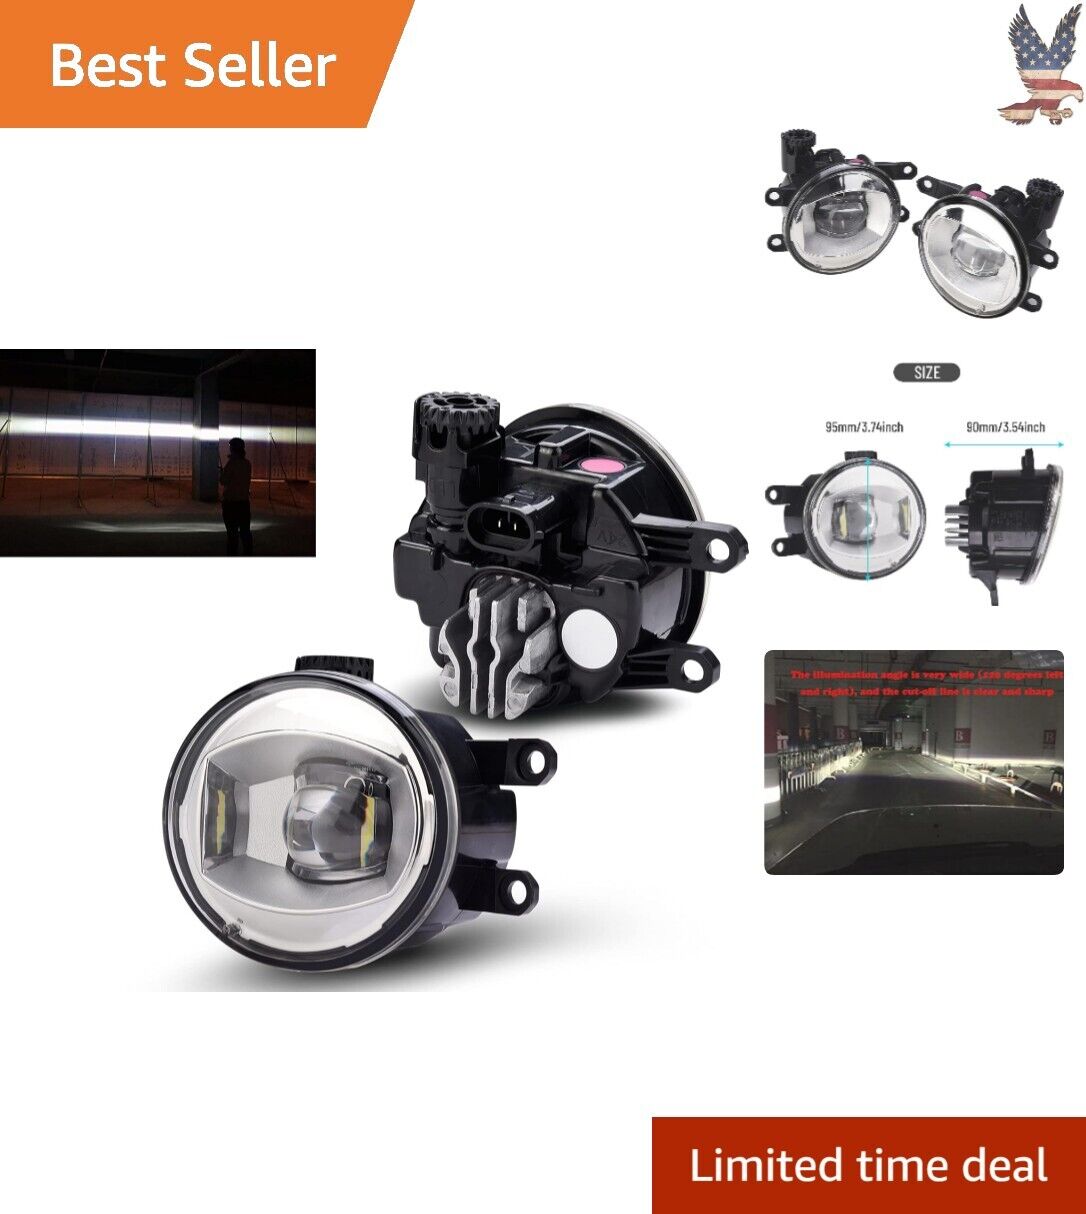 Premium High-Quality LED Fog Lights - Wide Angle Coverage - For Toyota Cars